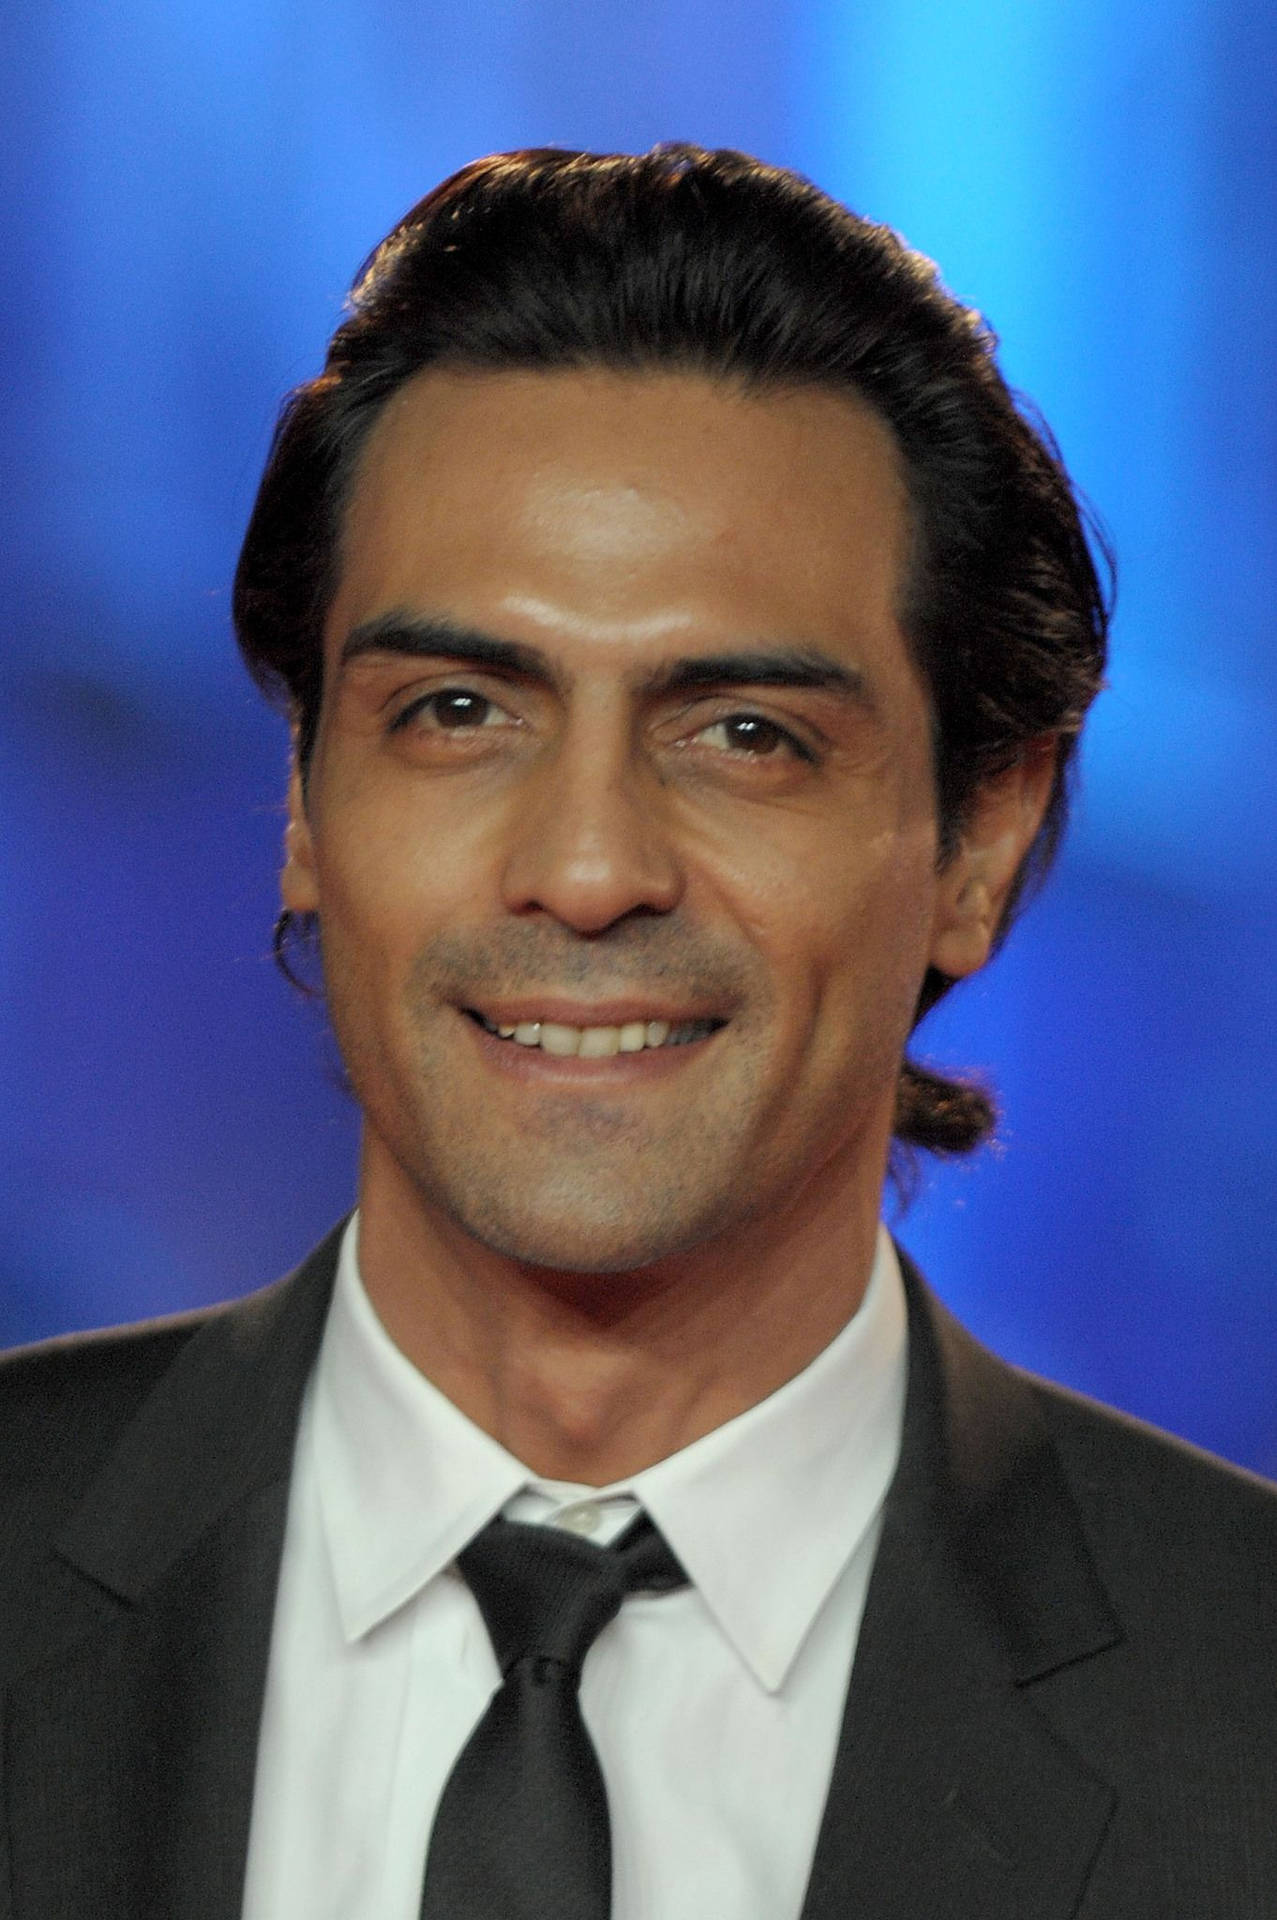 Smiling Arjun Rampal In Suit Background